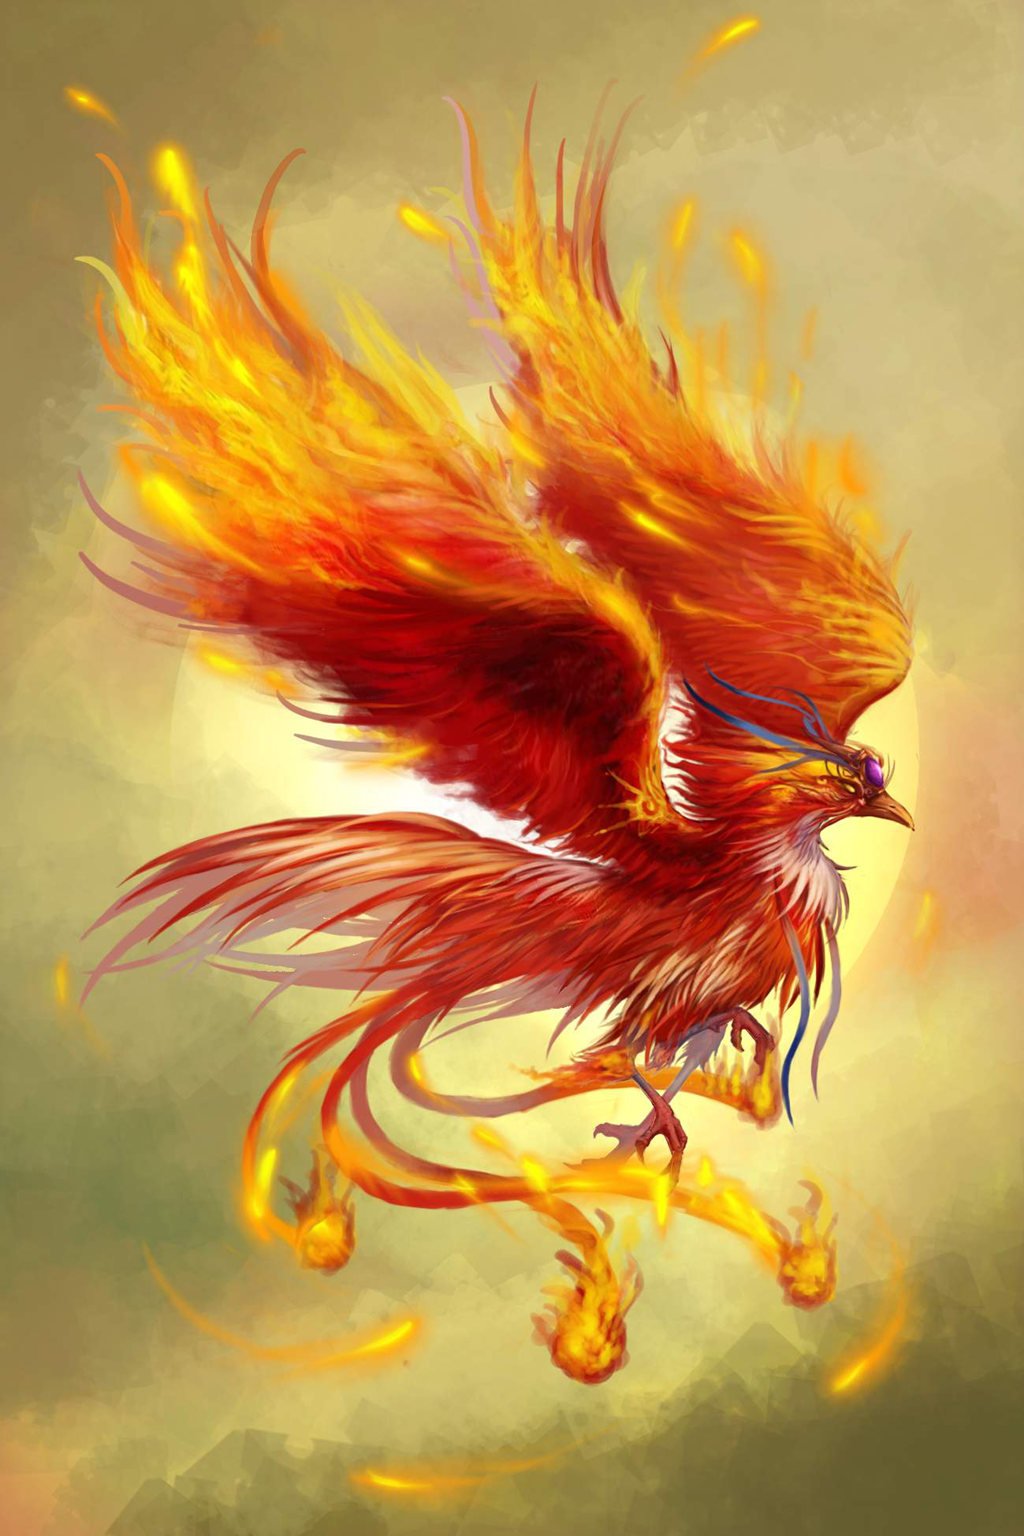 An illustration of a fire bird with three legs.